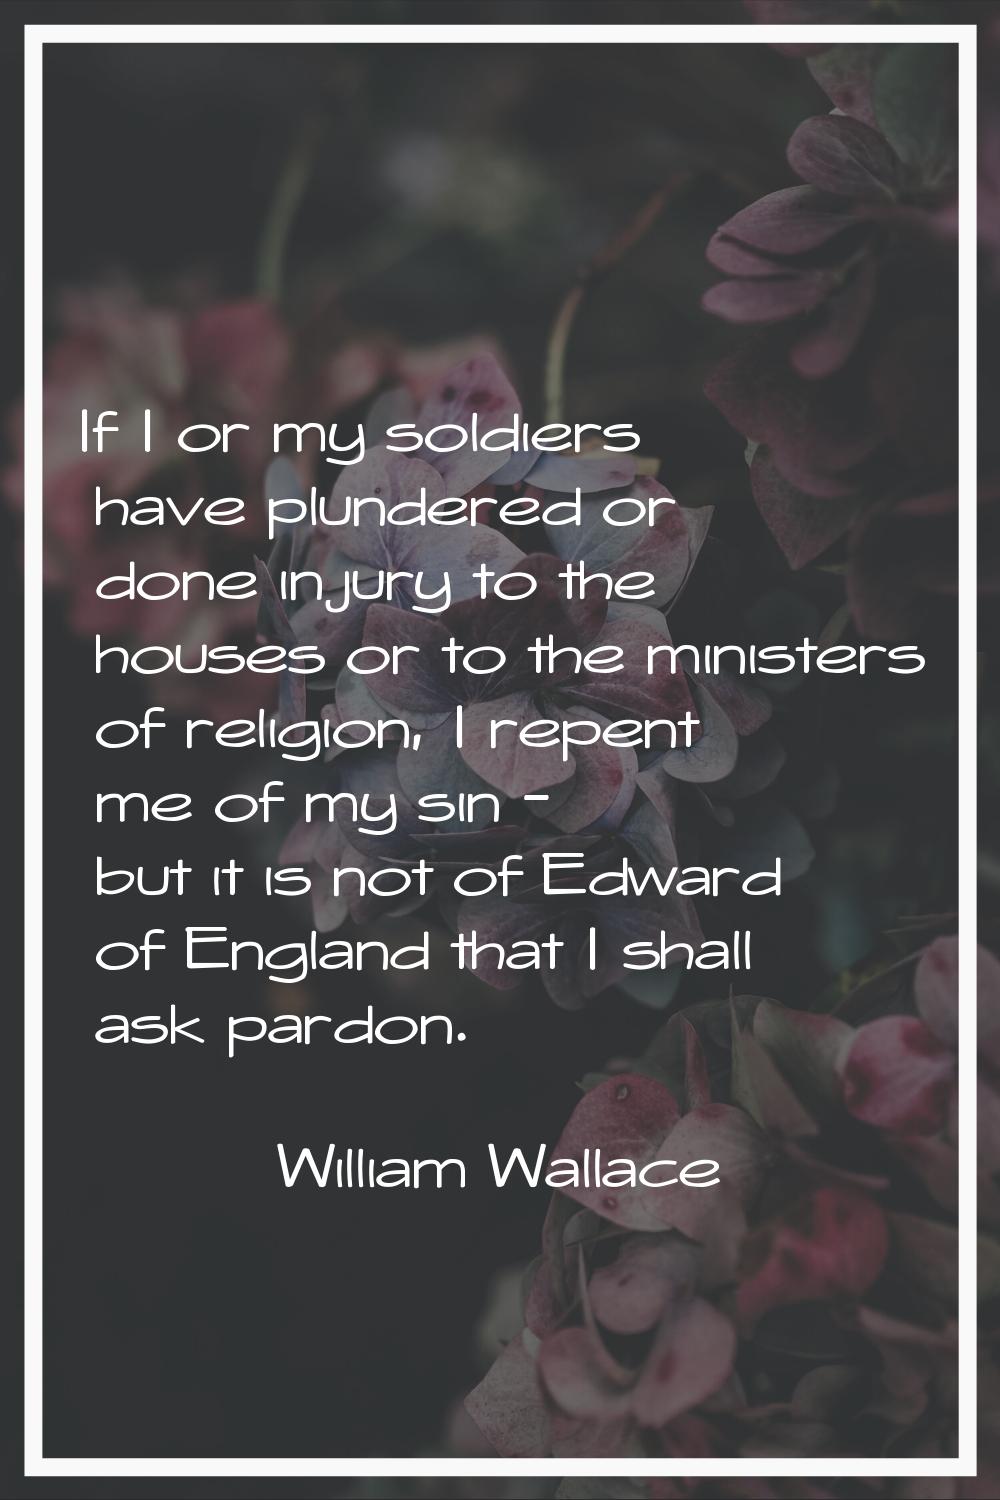 If I or my soldiers have plundered or done injury to the houses or to the ministers of religion, I 